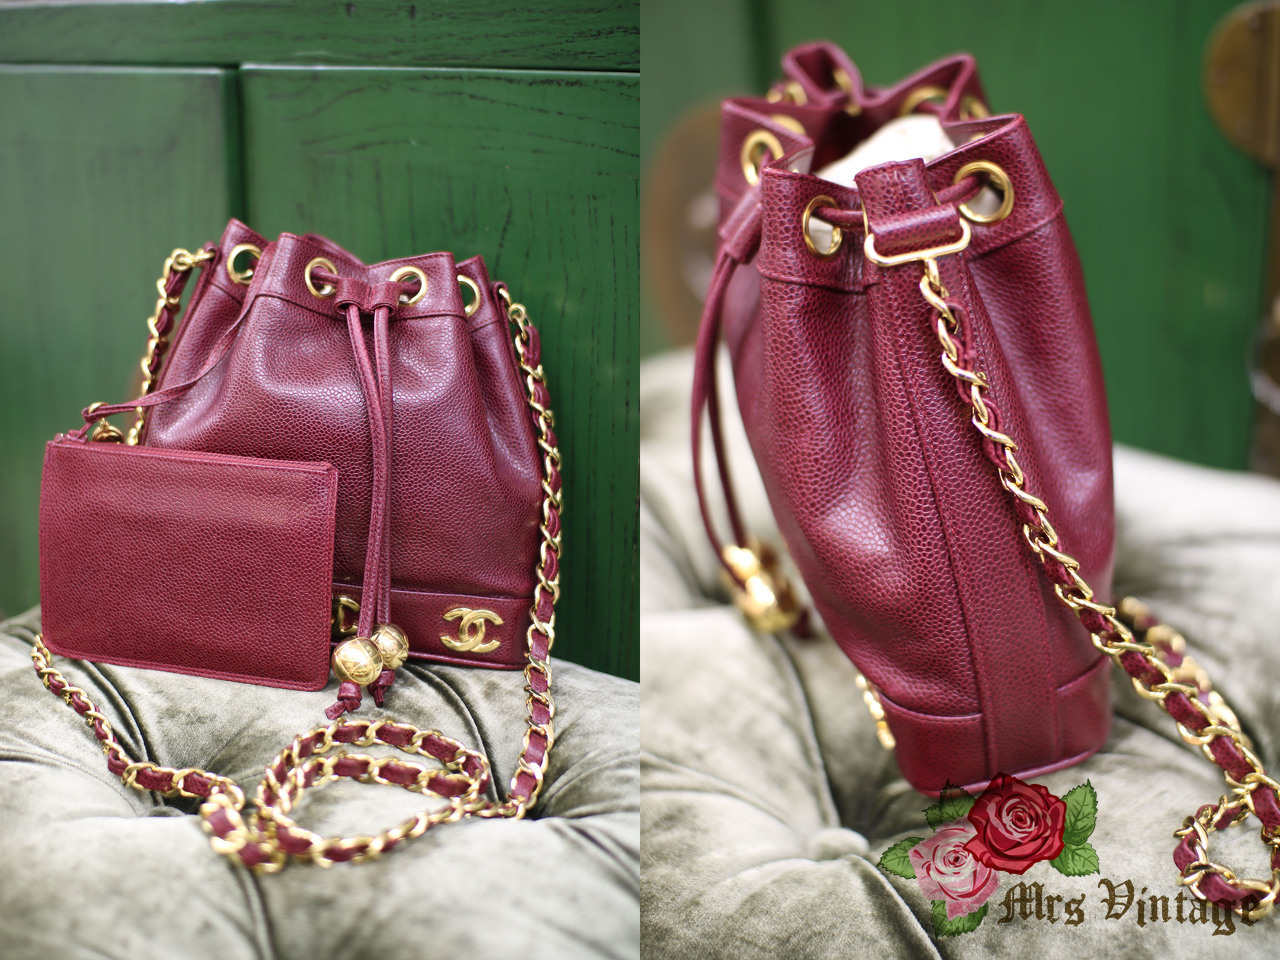 Vintage Chanel Raspberry Red Caviar Small Bucket Bag With 2 Golden